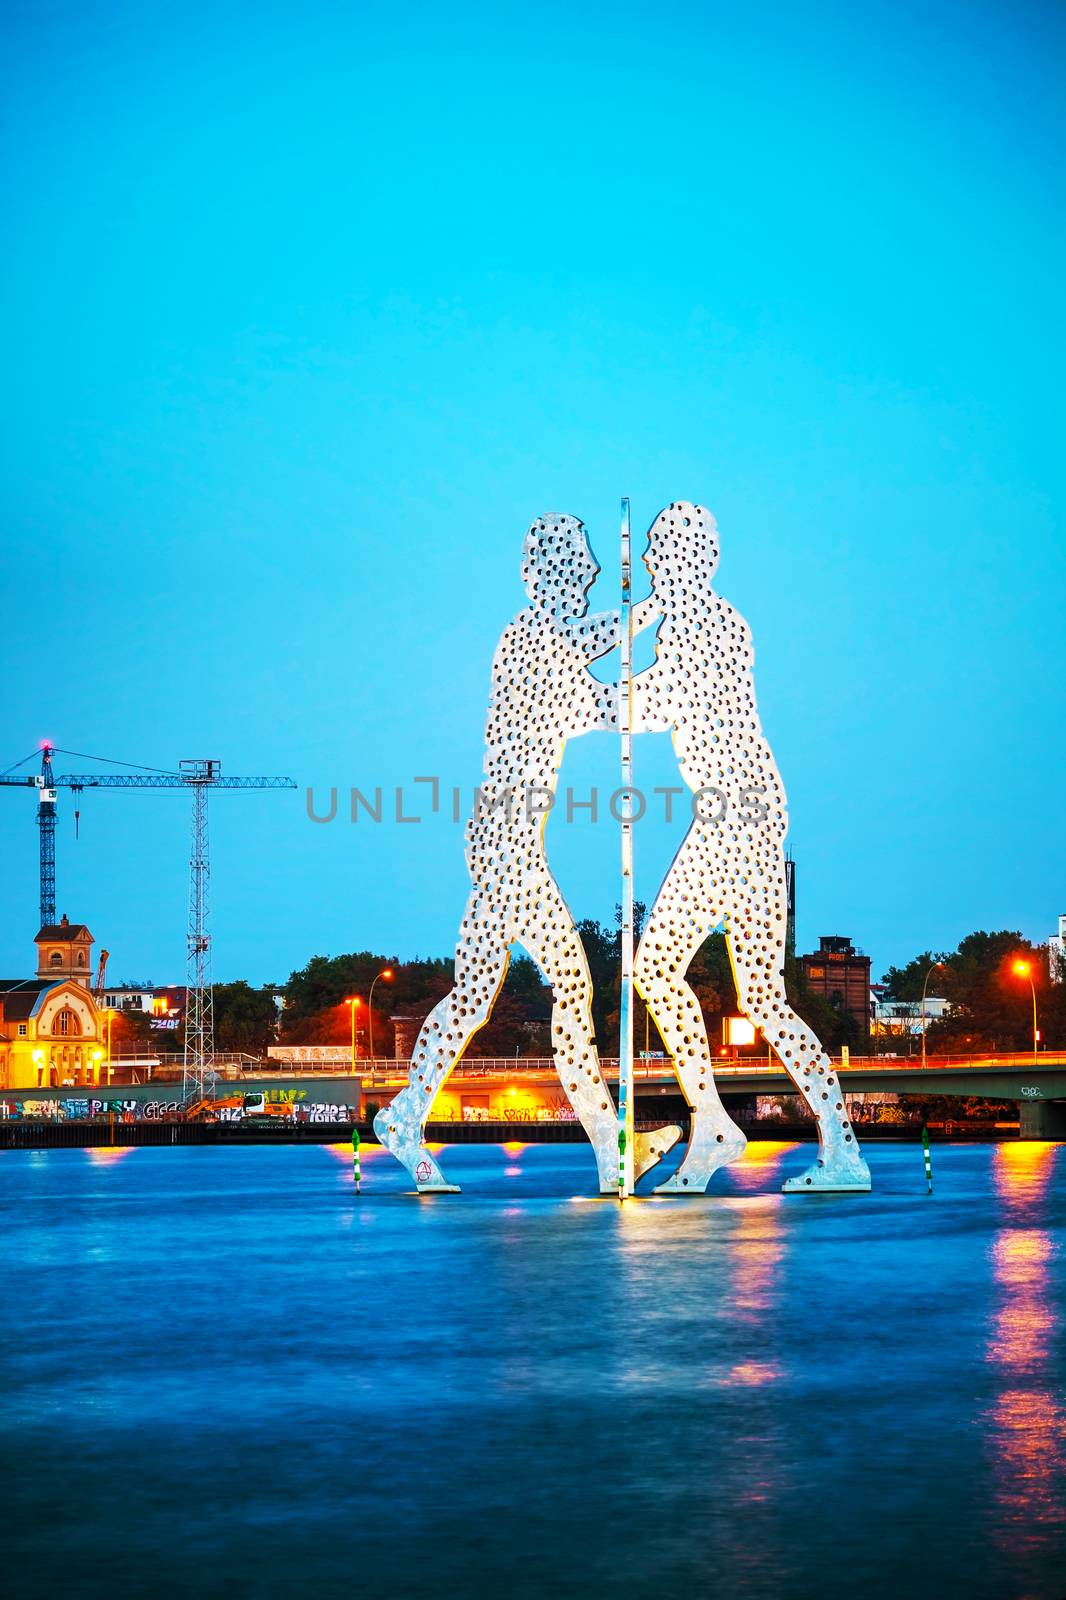 BERLIN - OCTOBER 4, 2014: Molecul Man sculpture on October 4, 2014 in Berlin, Germany. It's one in a series of aluminium sculptures, designed by American artist Jonathan Borofsky, installed at various locations in the world, including Berlin.